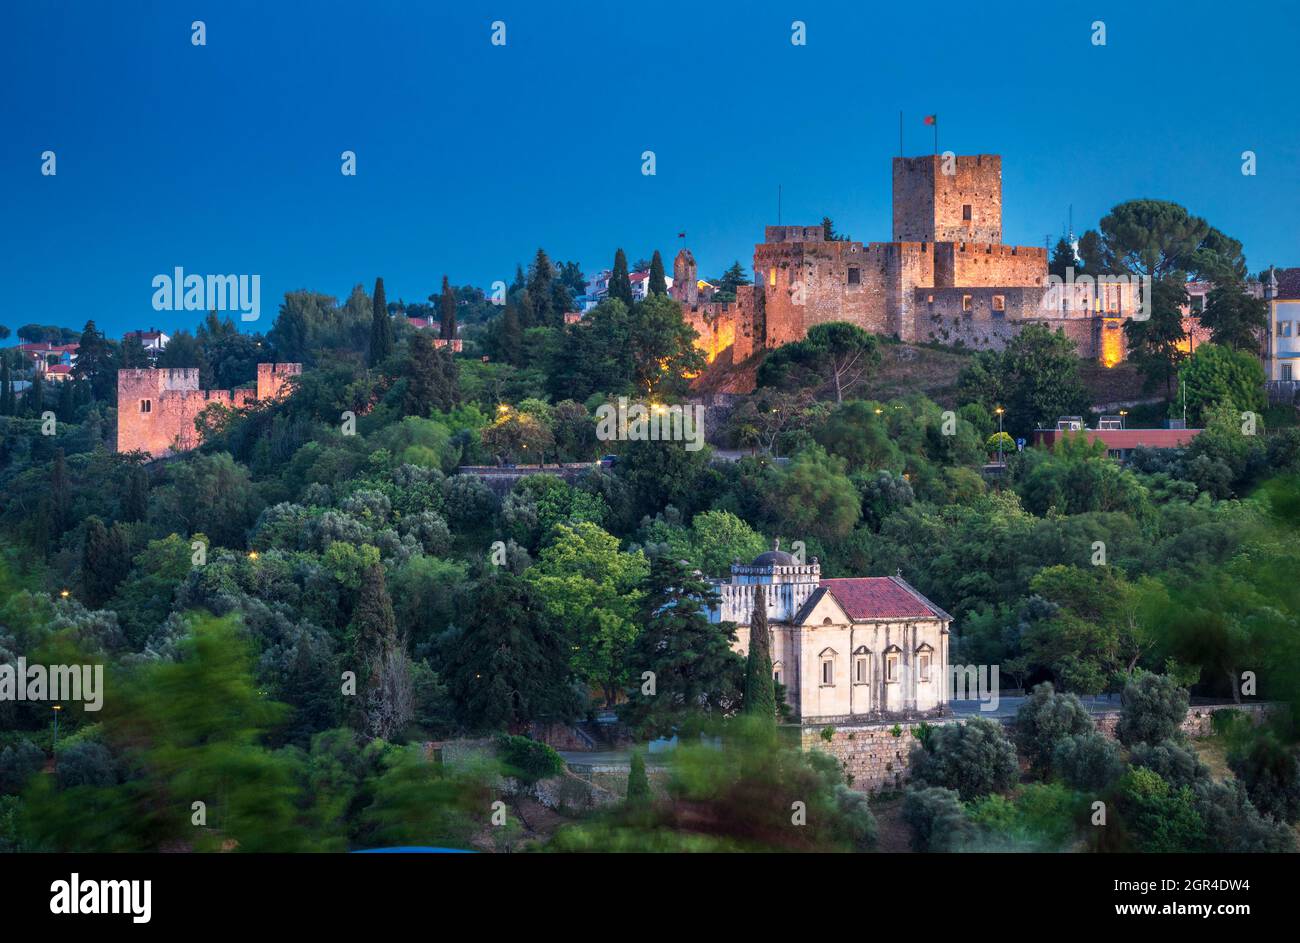 Beautiful landscape of Tomar Castle at dusk, with the Chapel of Nossa Senhora da Conceição at the bottom, in the city of Tomar, Portugal. Stock Photo